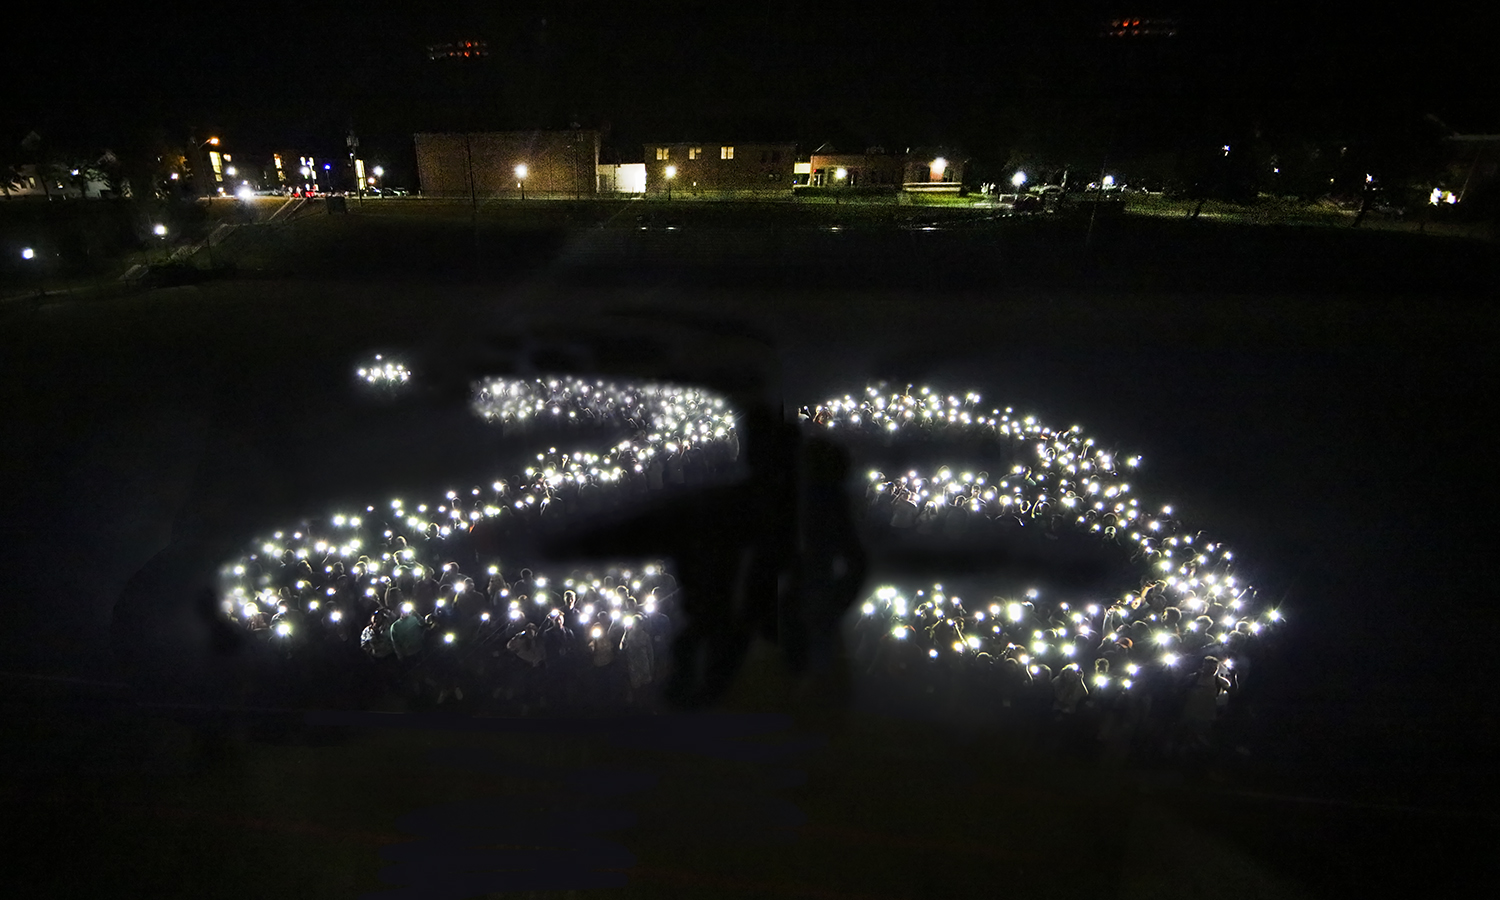 As Commencement Weekend begins, we look back at the Classes of 2023’s four-year journey at HWS. Here, students gathered for an illumination photo during Orientation.